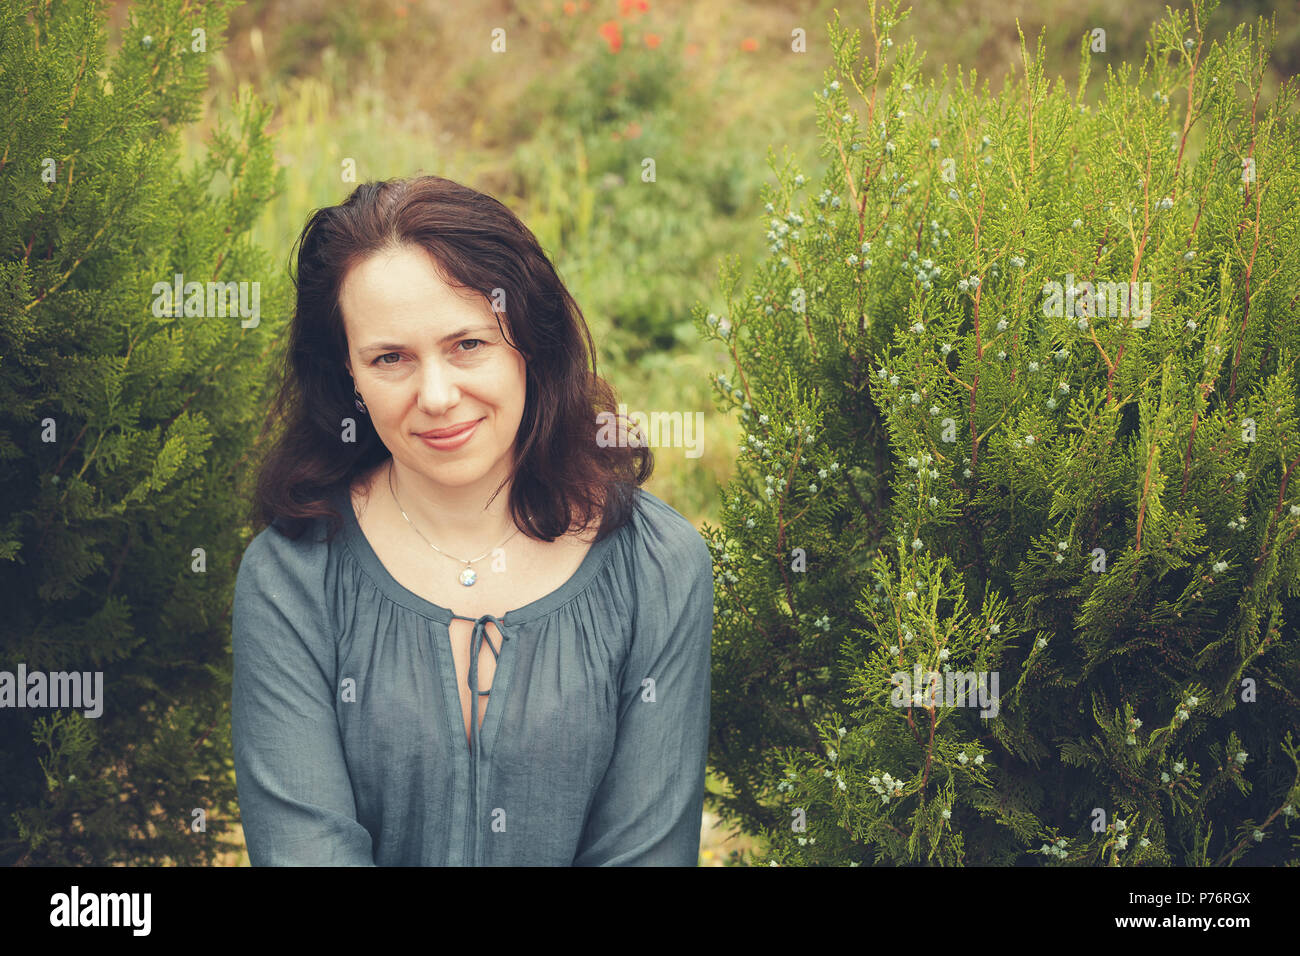 Smiling young adult European woman in garden. Vintage toned outdoor portrait Stock Photo